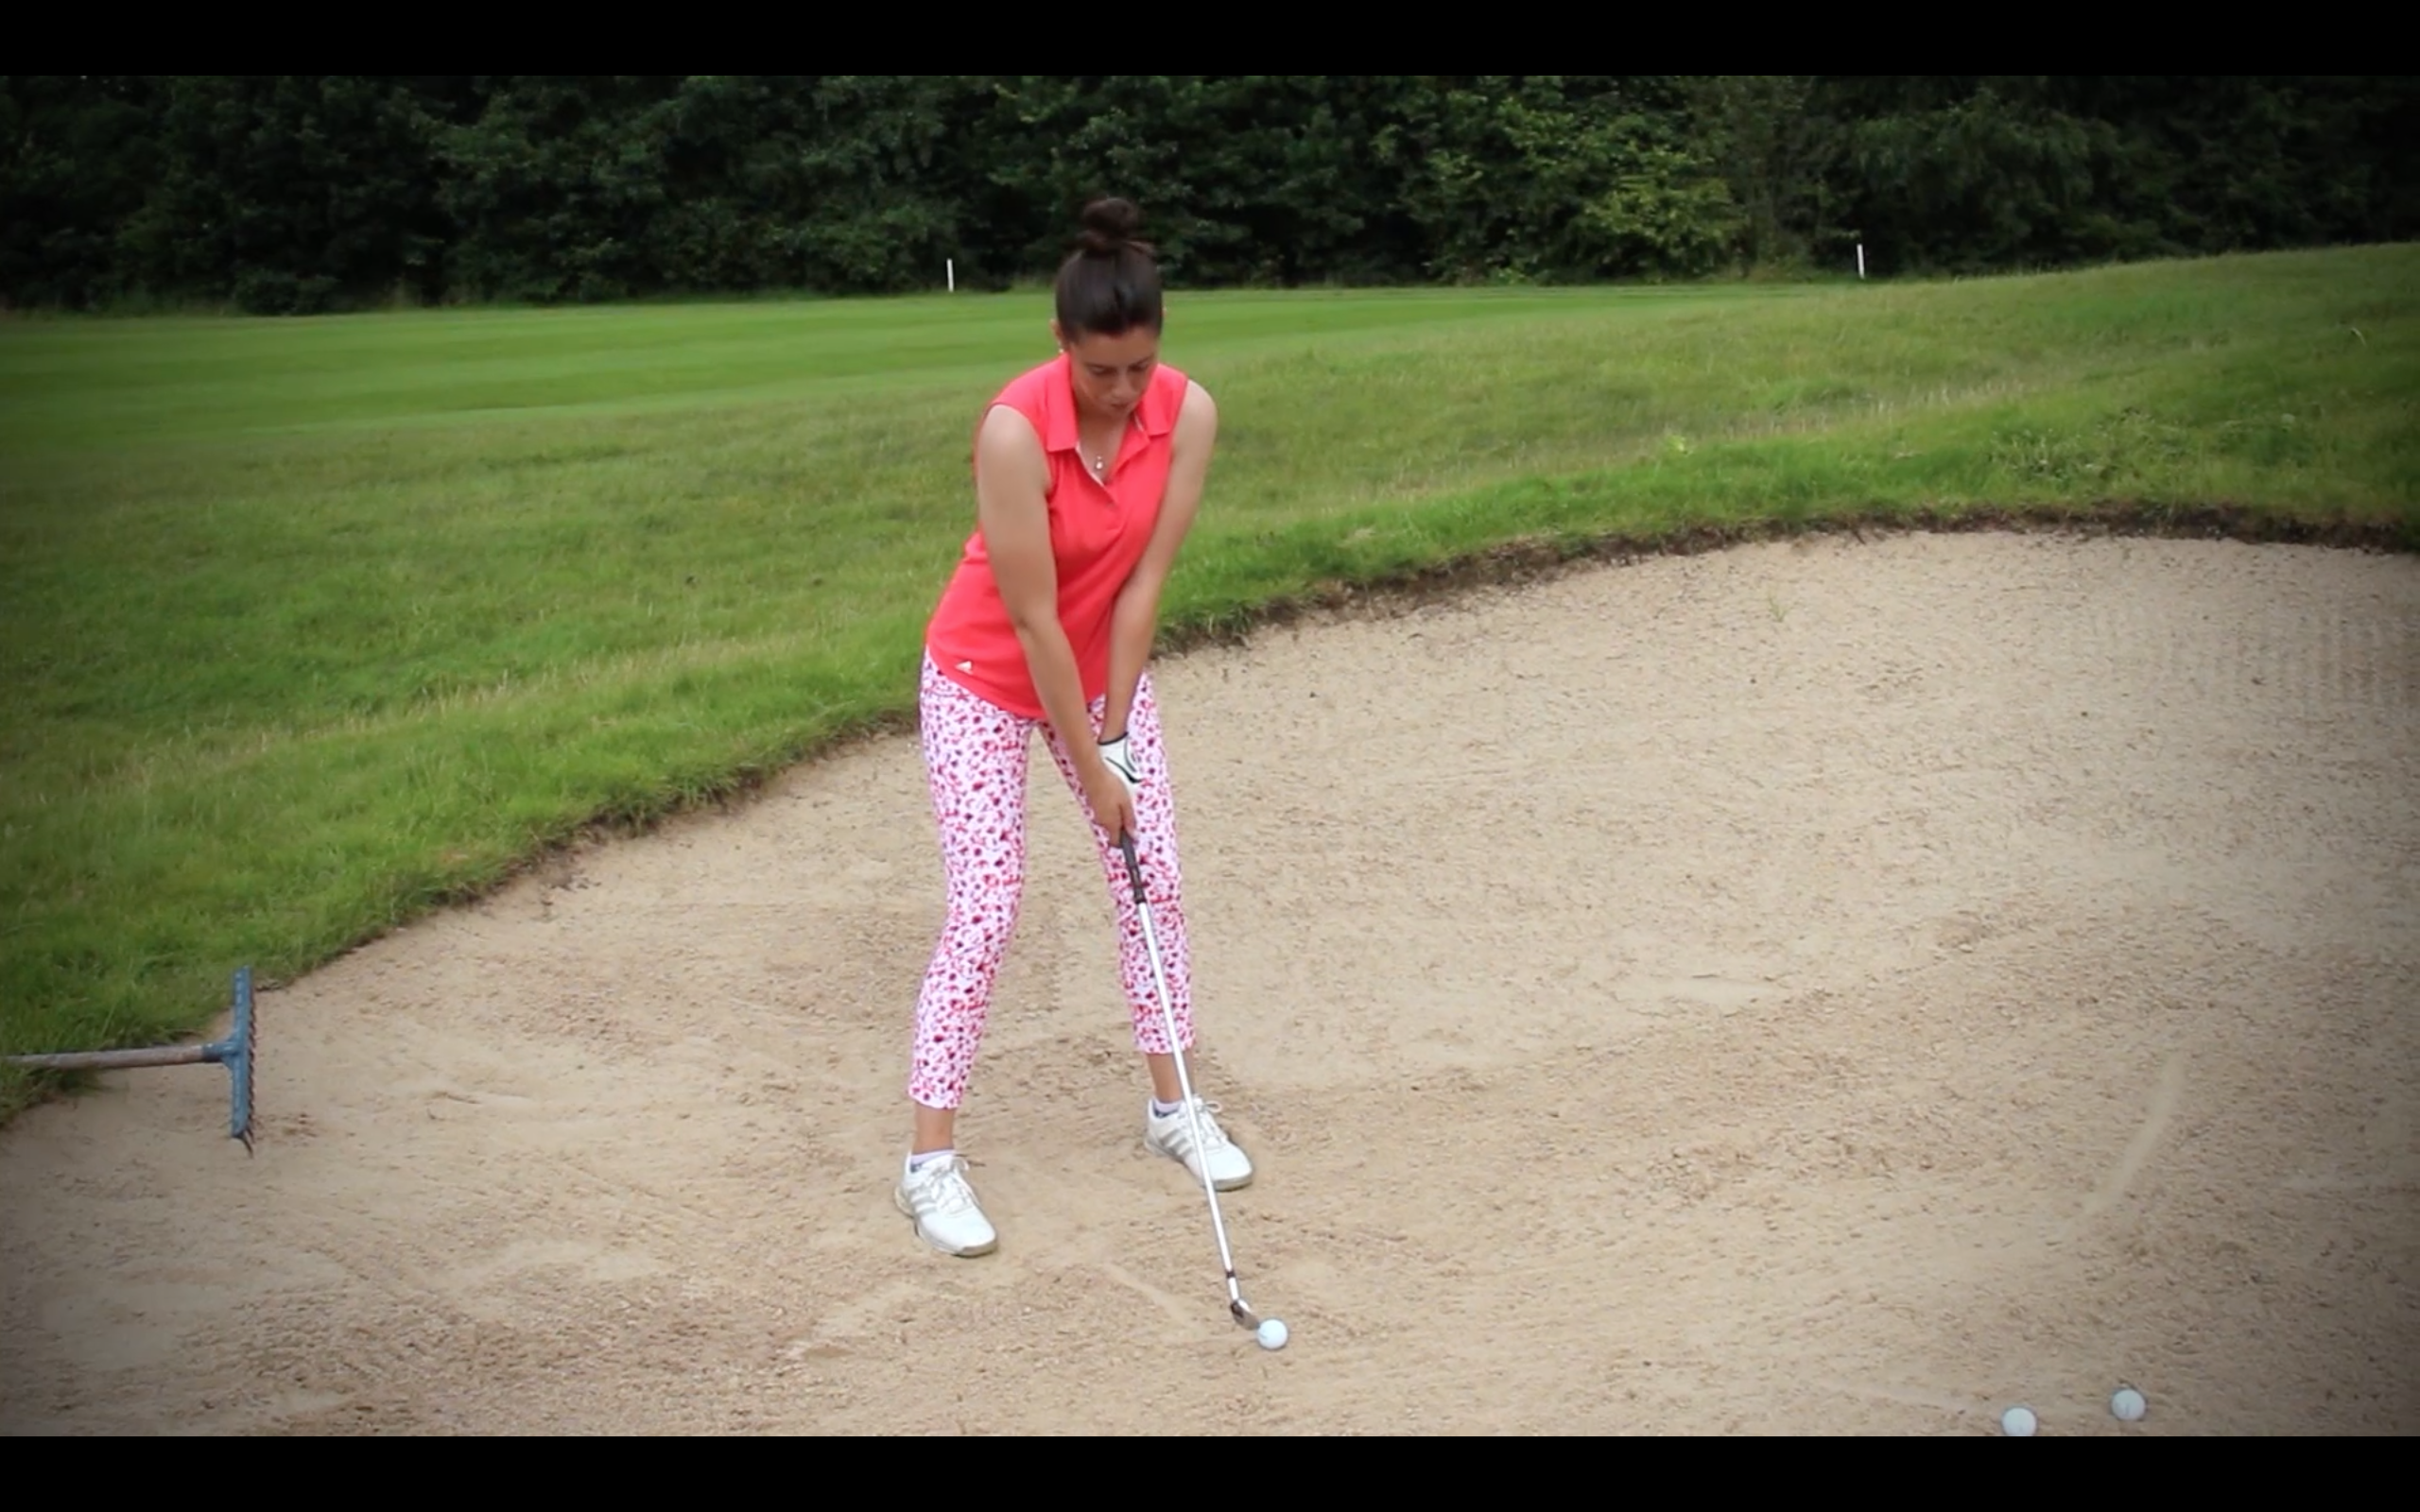 Tips: Get out of fairway bunkers